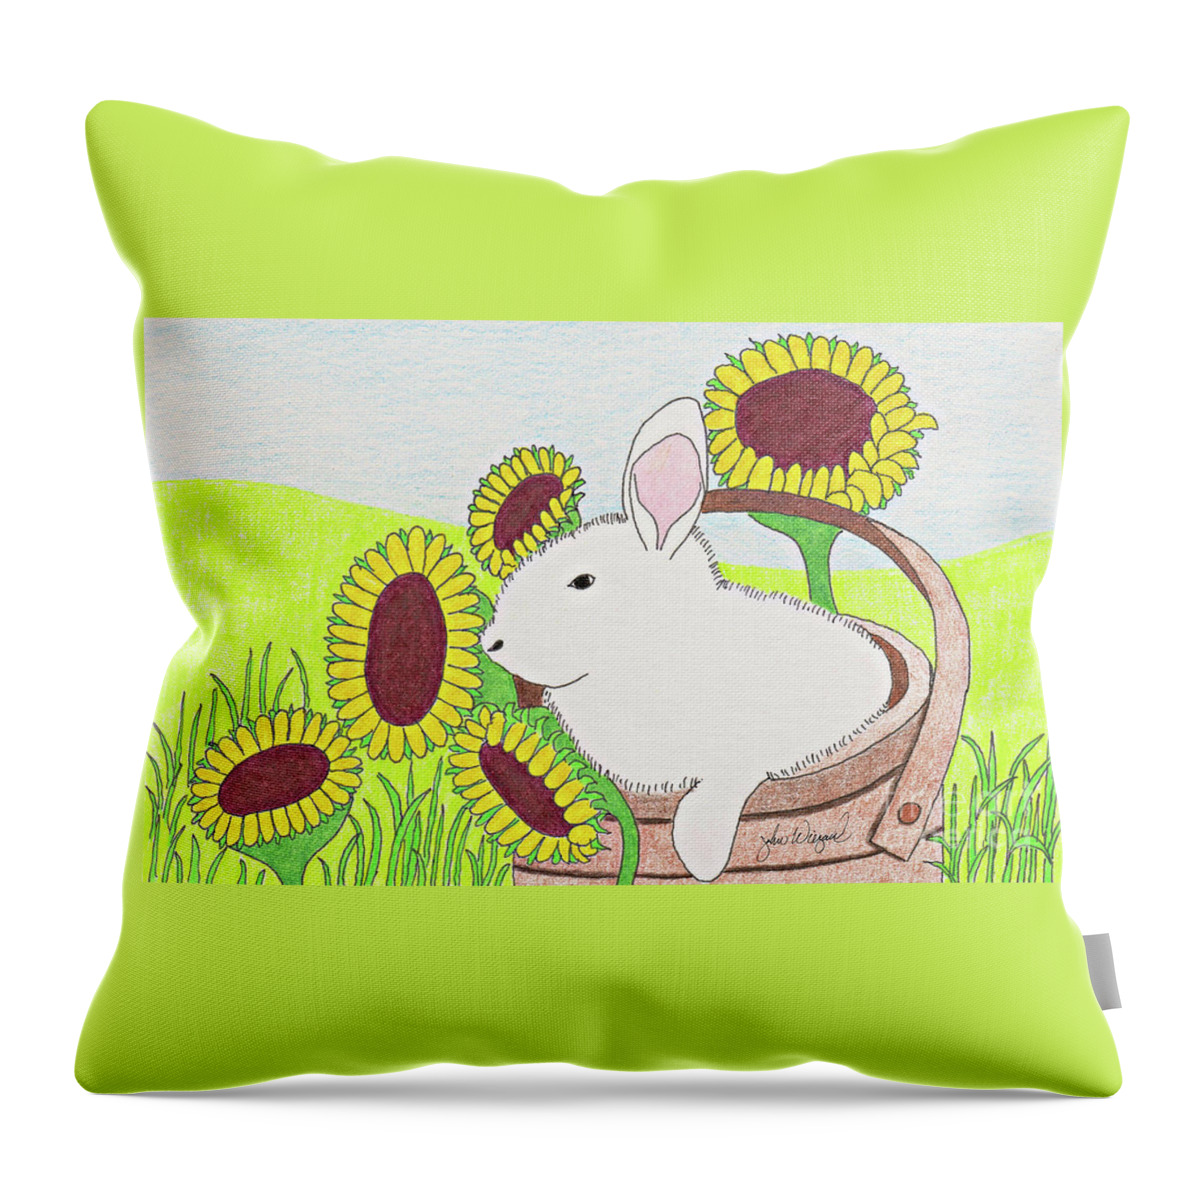 Bunny Throw Pillow featuring the drawing Bunny in a Basket by John Wiegand